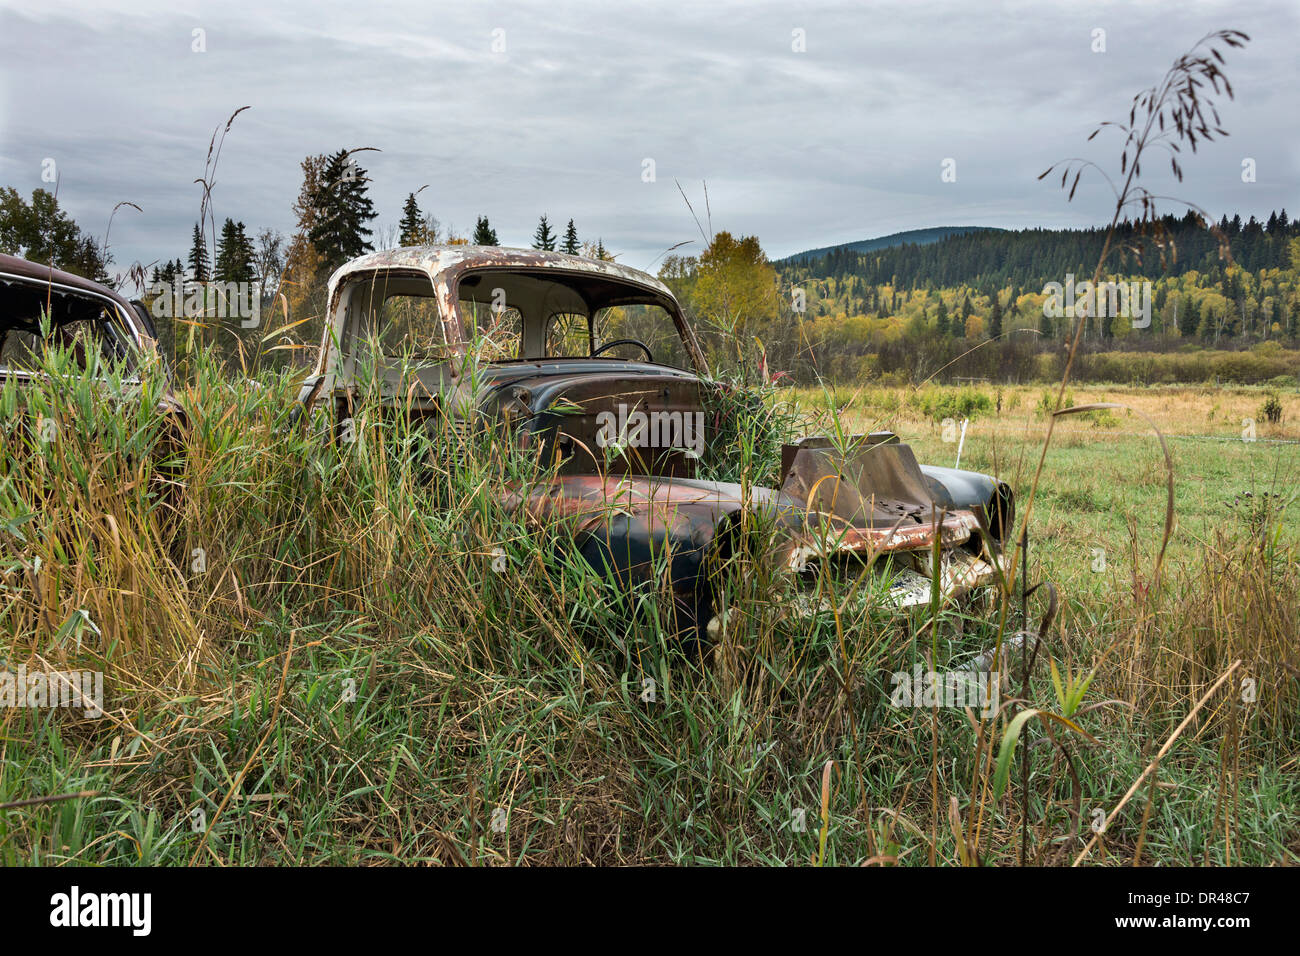 Abandoned old Chevy truck, on a farm near Likely, Cariboo-Chilcotin region, British Columbia Stock Photo